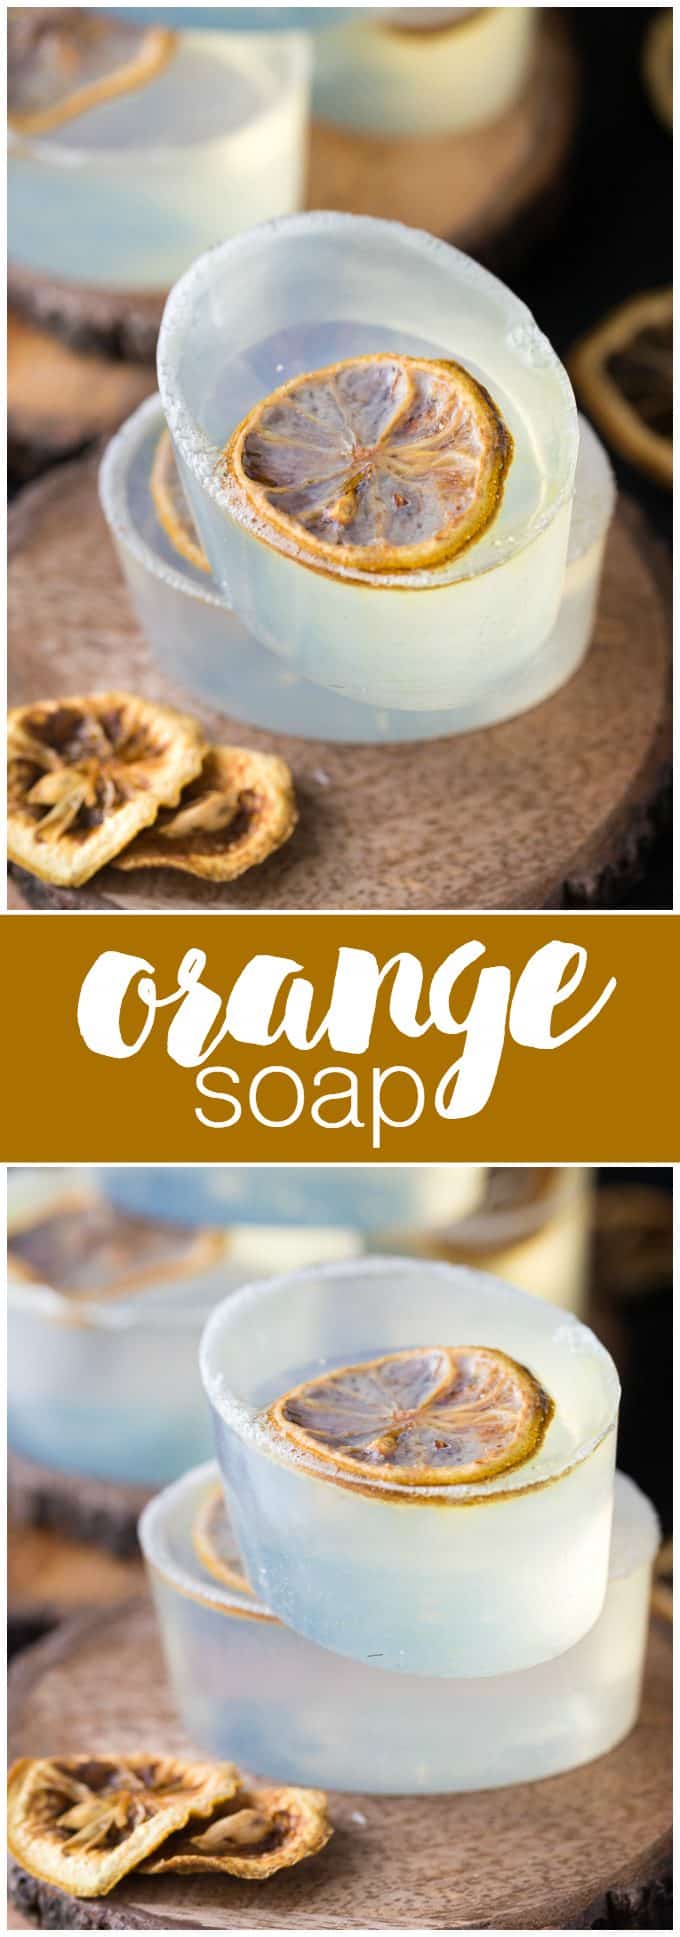 Orange Soap - Fresh and invigorating! Whip up a batch of this beautiful soap perfect for gift giving.